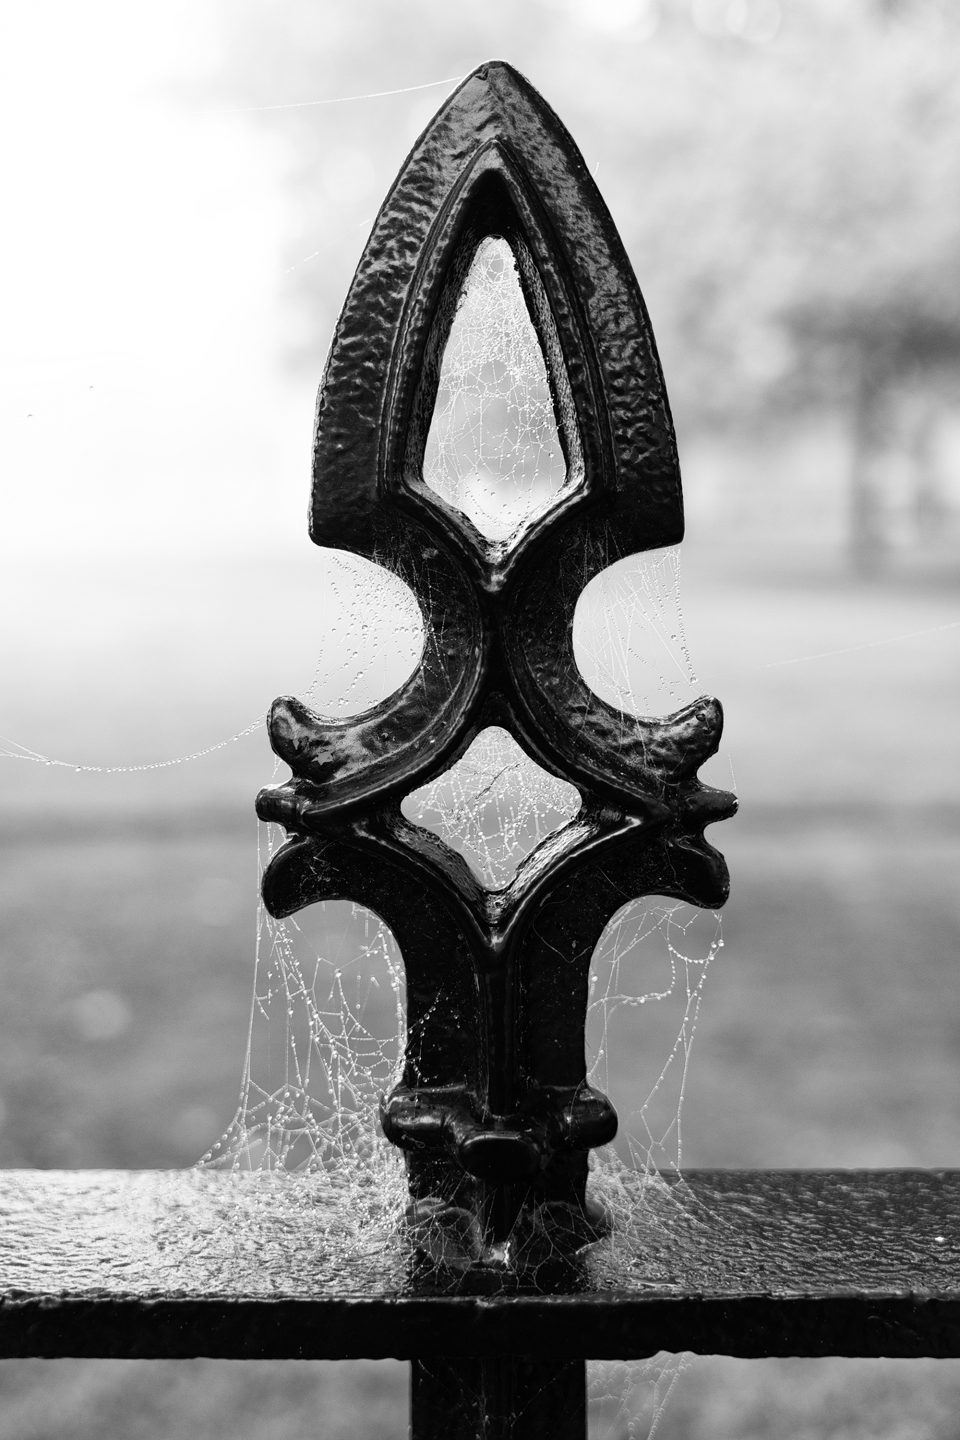 Black and white photograph of a fence picket draped in cobwebs sparkling with dew drops
